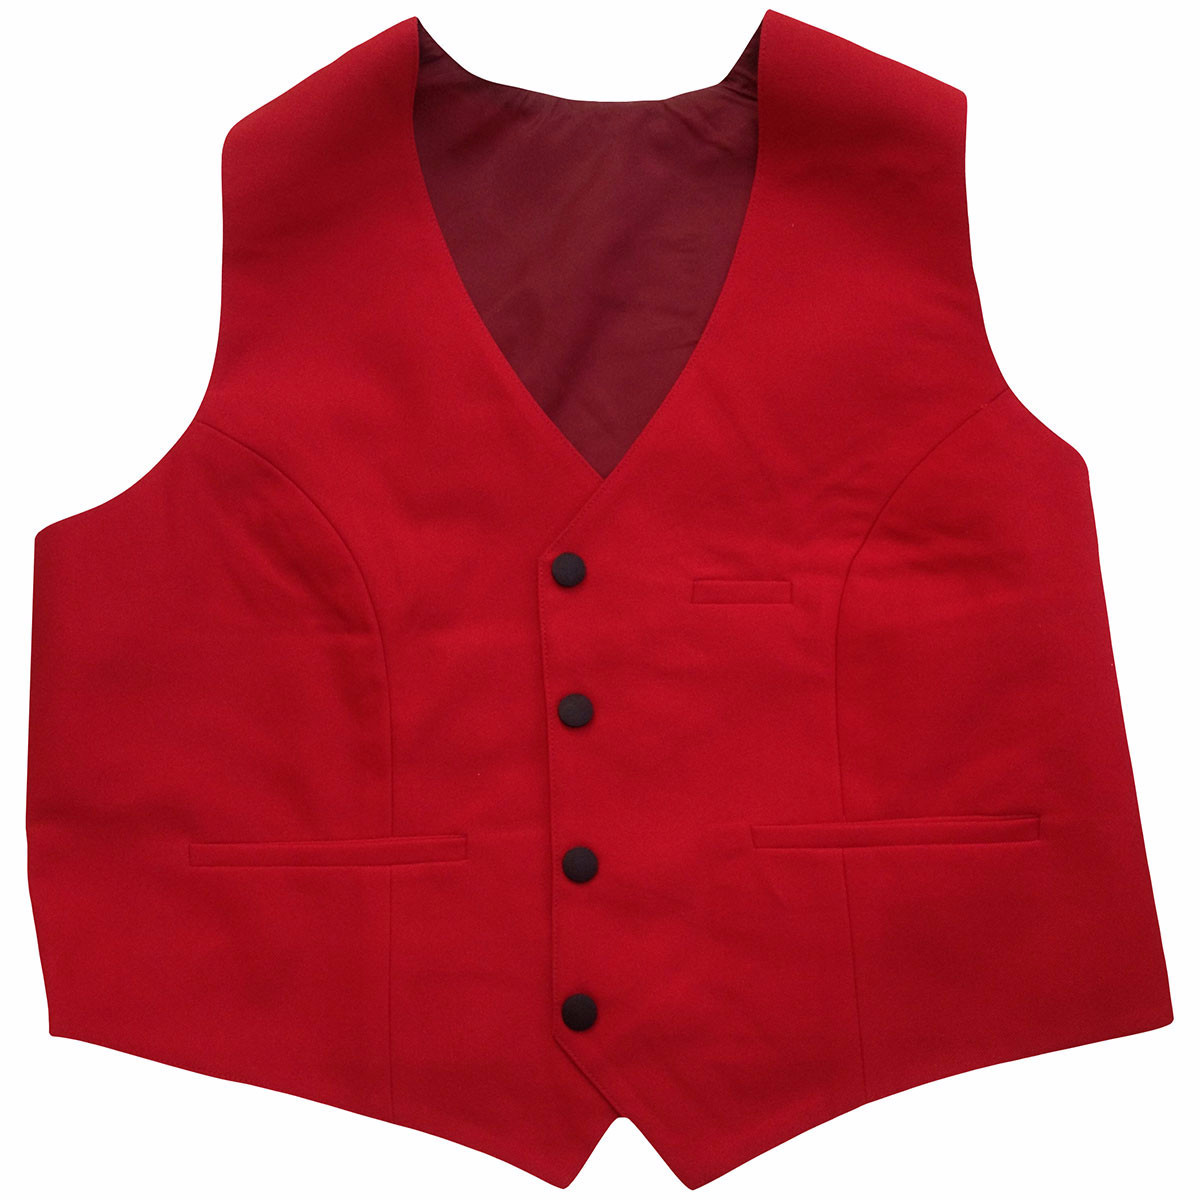 Women's Red Tuxedo Vest With 4 Buttons